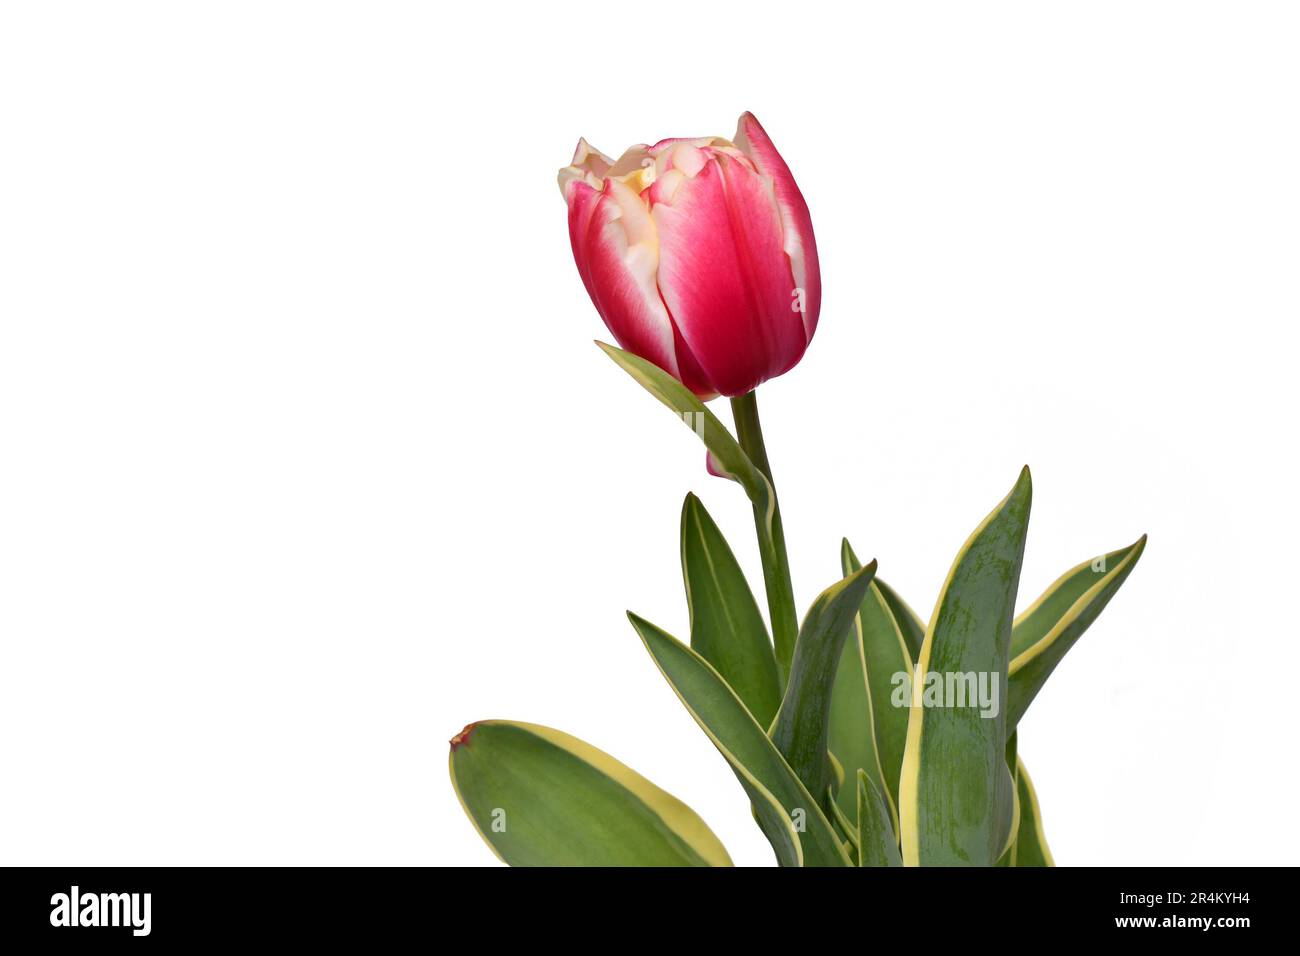 Close up of 'Tulipa Red Sparks Toplips' tulip flower with pink color and white tips on white background Stock Photo